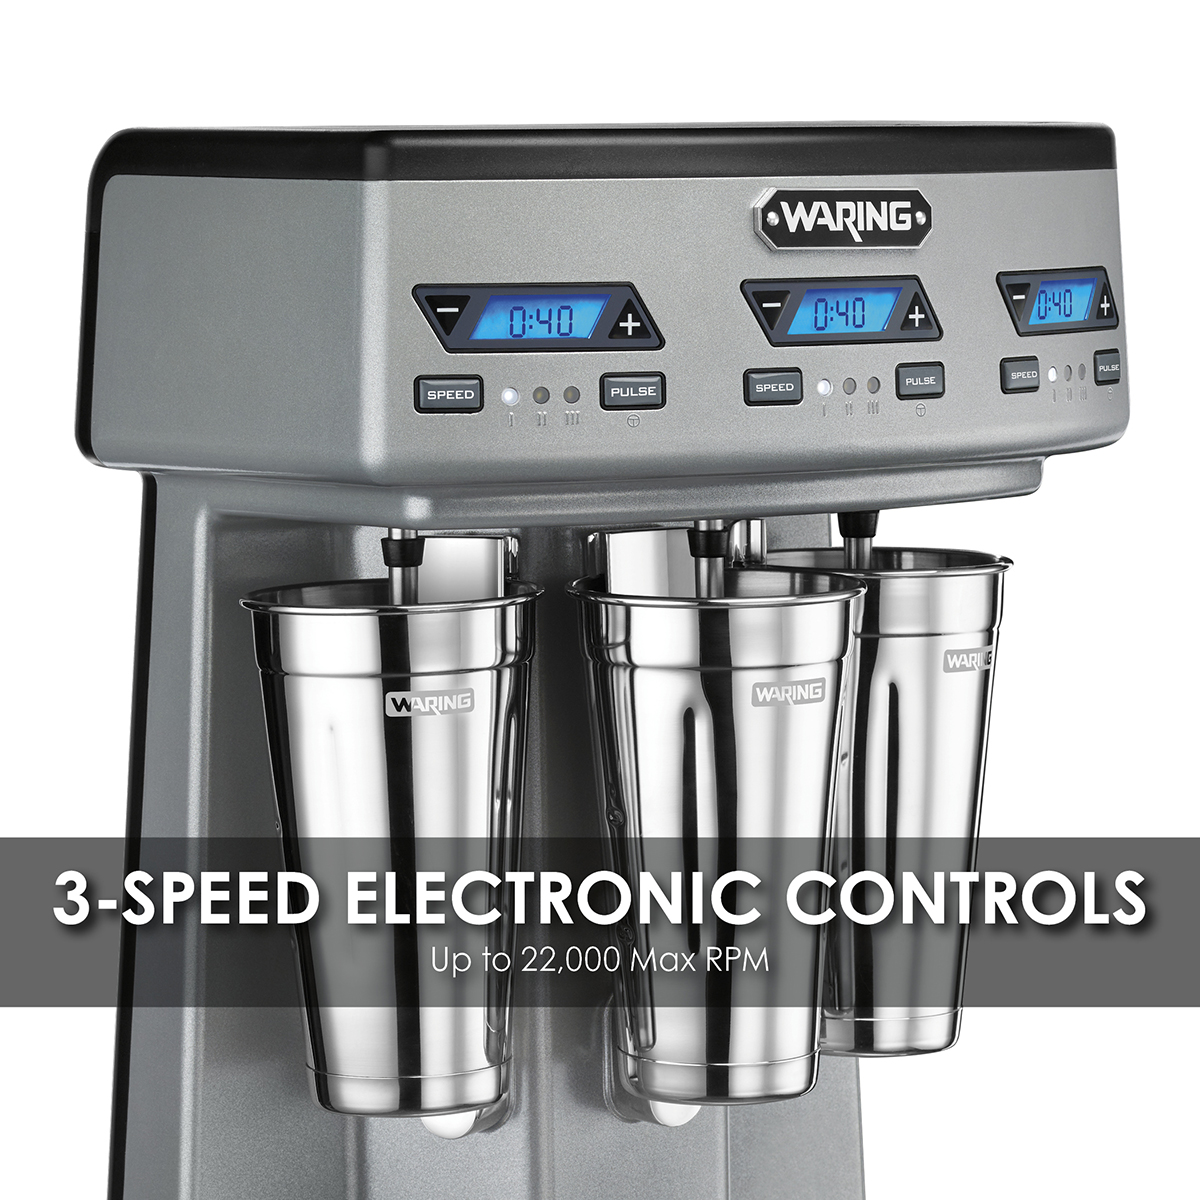 https://www.waringcommercialproducts.com/files/products/wdm360tx_hires_04_1200.jpg